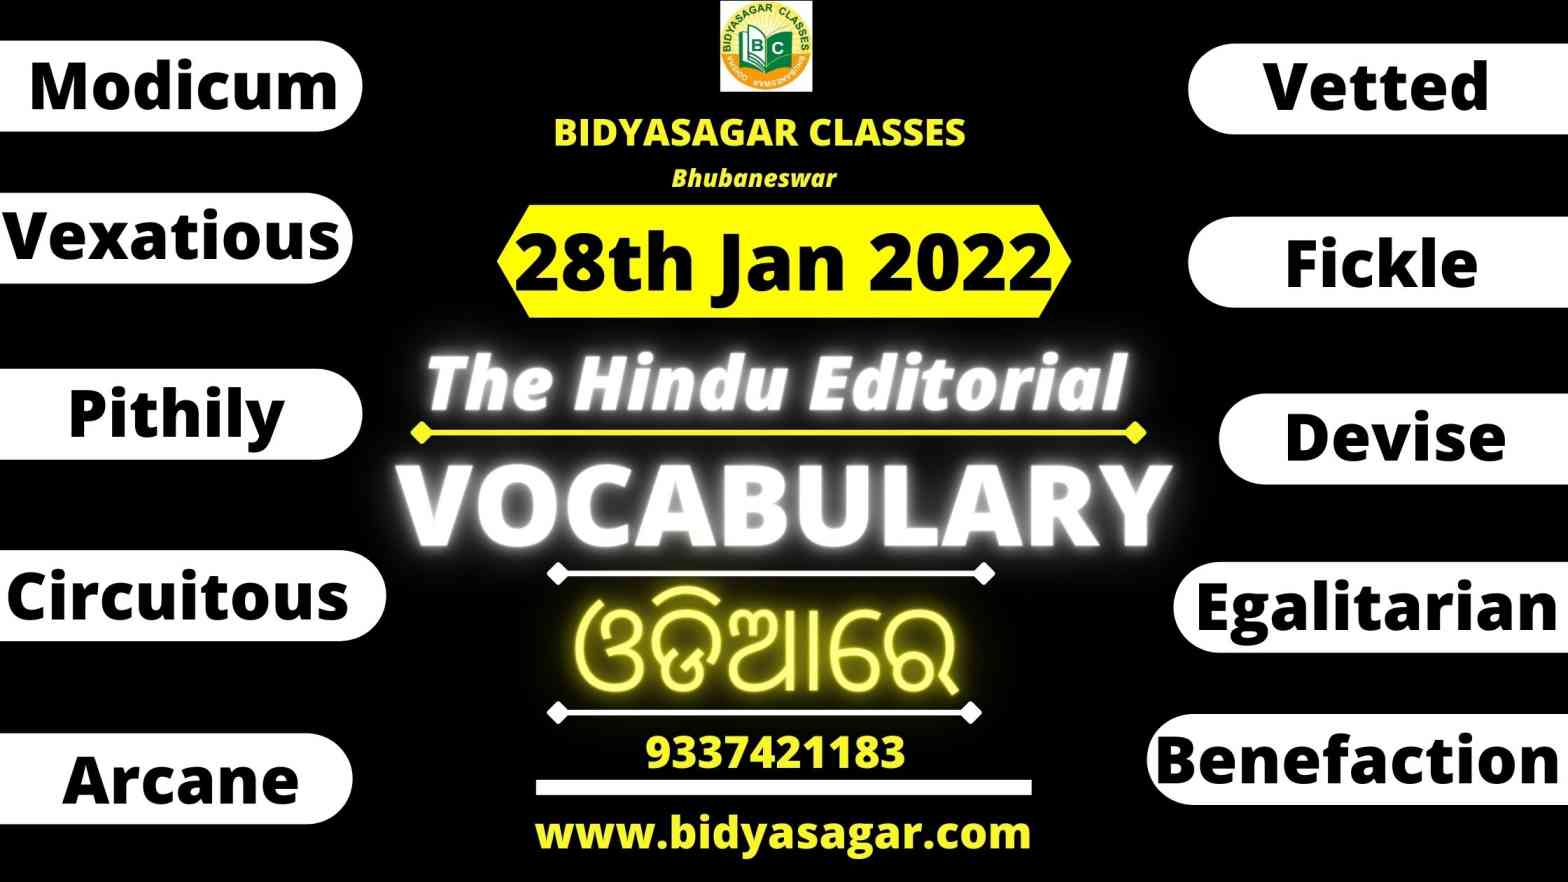 The Hindu Editorial Vocabulary of 28th January 2022